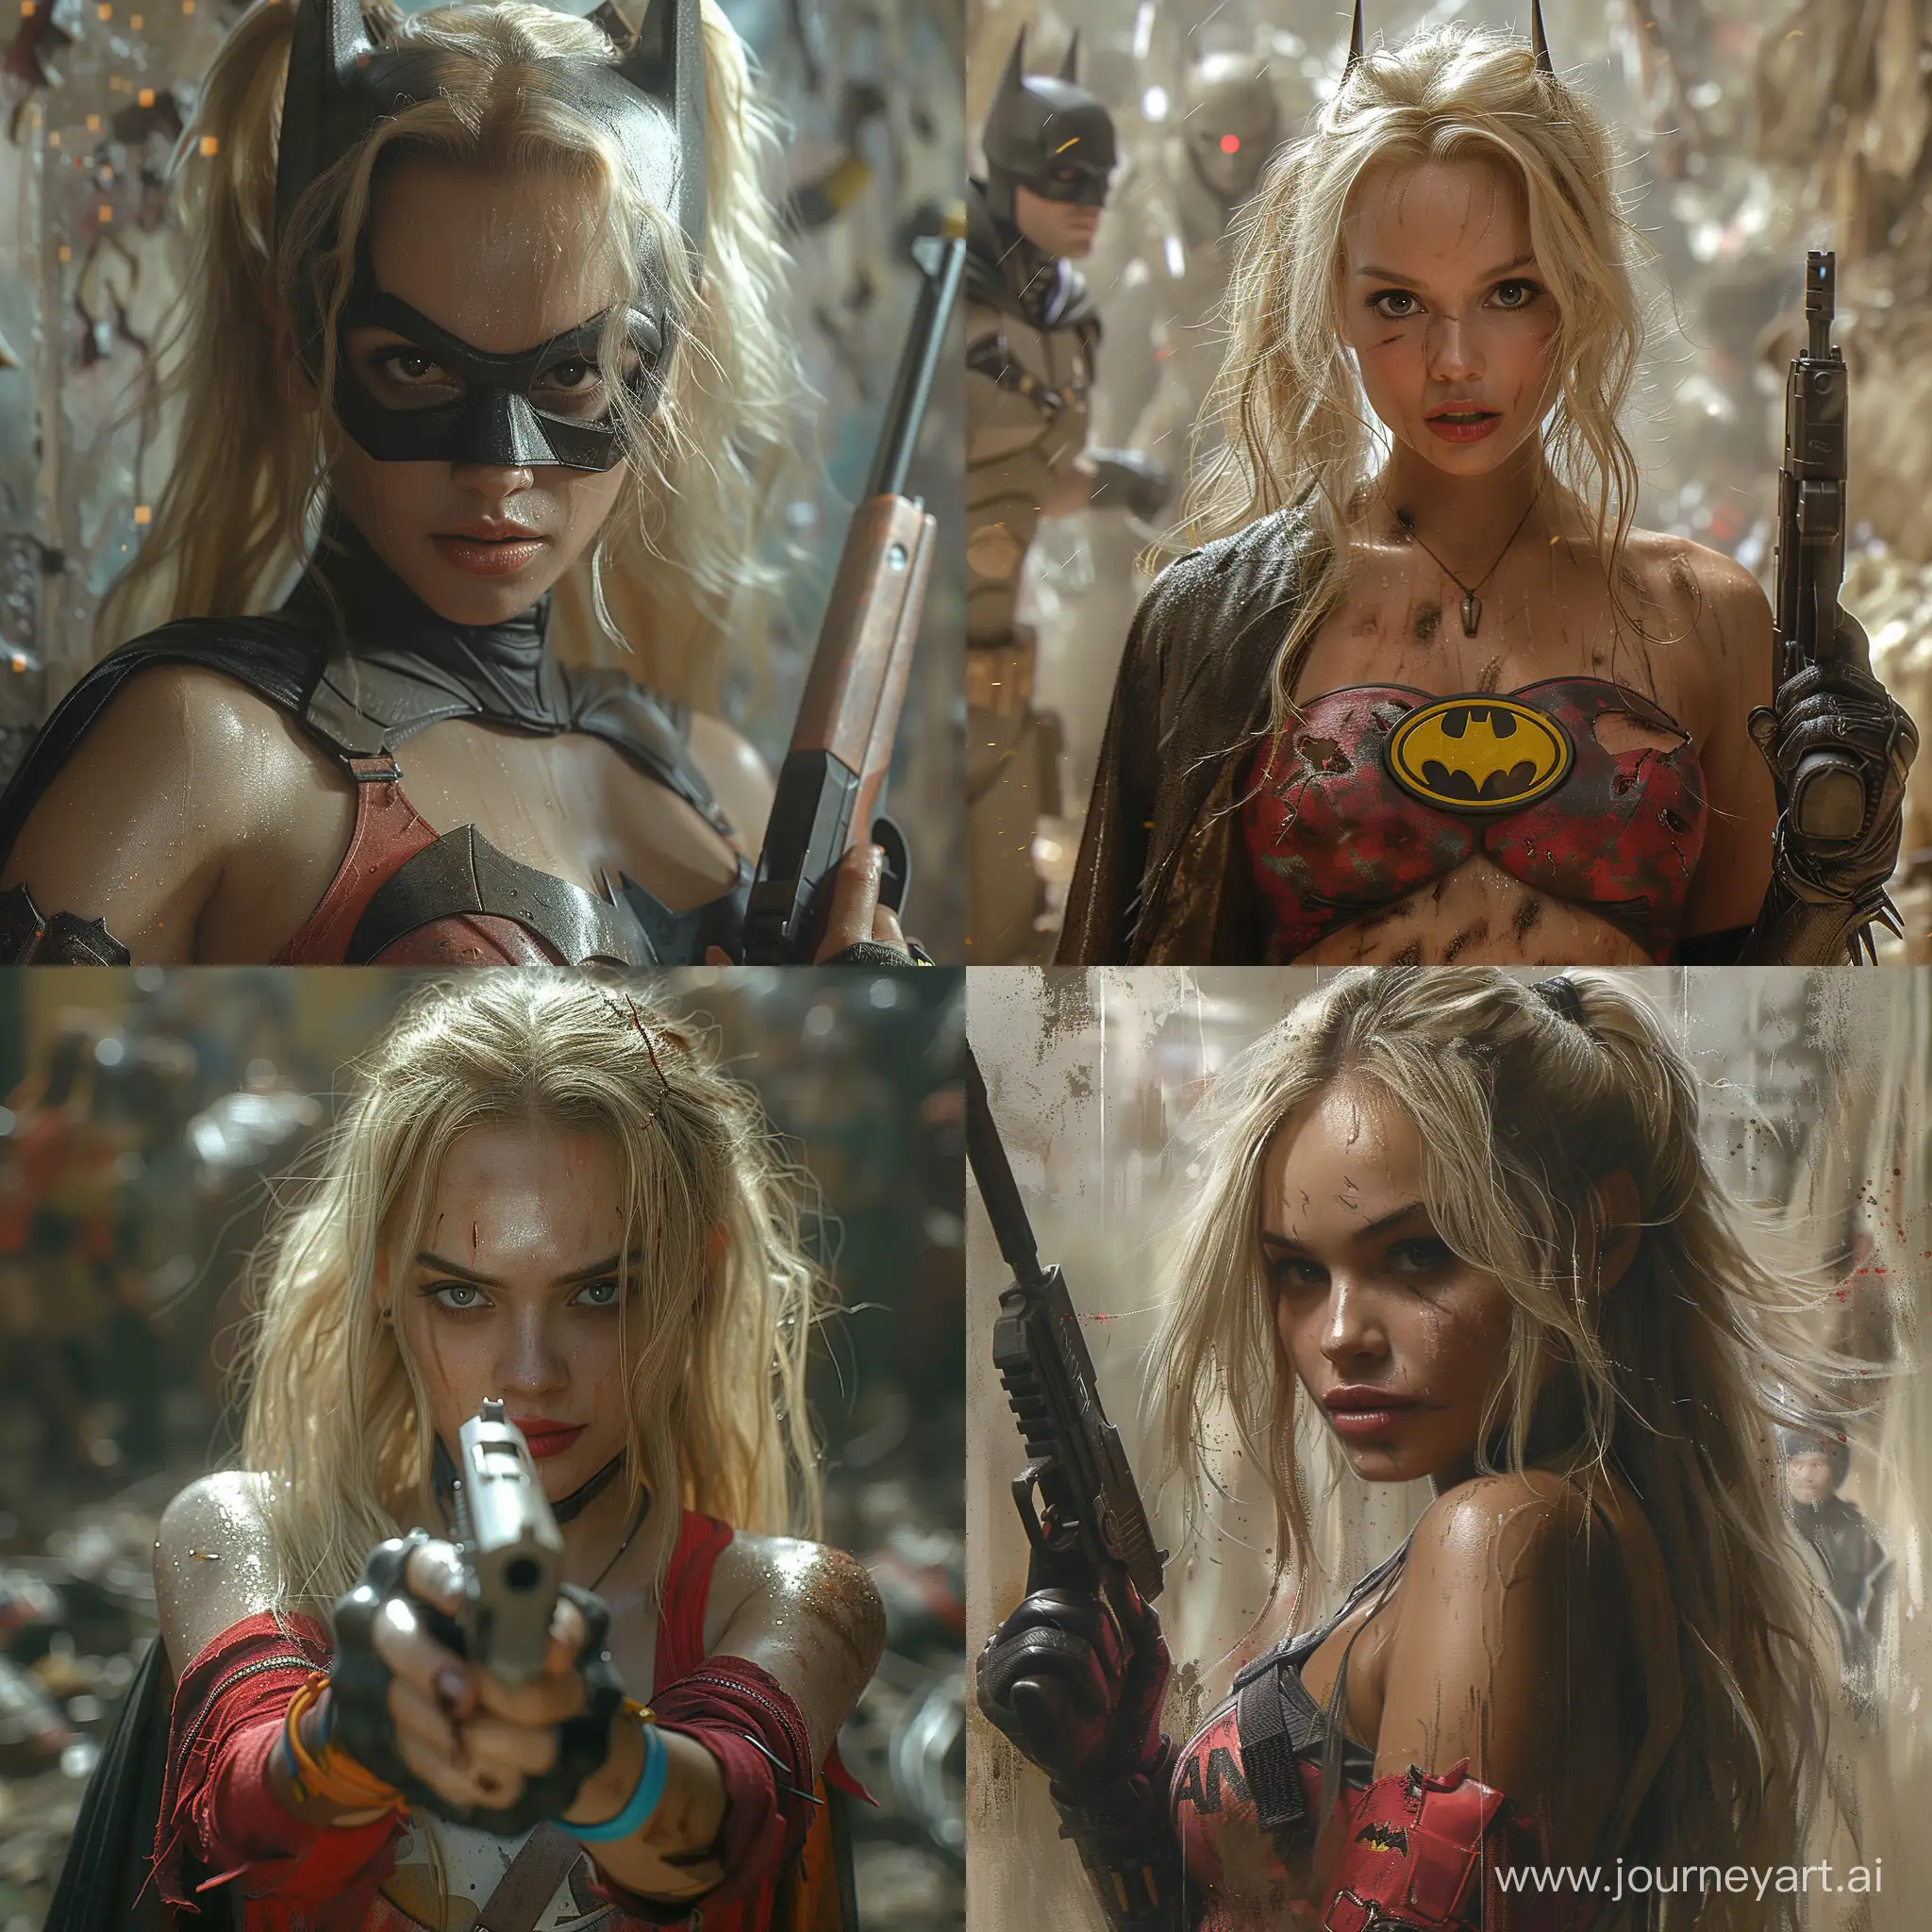 harley quinn from 2022 movie has a menacing personality, a costume intended to create a sinister appearance
Batman wears his costume, suggesting a story of survival or combat. It is worth noting that Batman holds a firearm with a focused gaze, which enhances the feeling of threat.The background behind Batman is unclear and chaotic, with undertones suggesting a post-apocalyptic or war-torn environment. This background completes the hostile image of Batman.Designed to induce a feeling of unease or to subvert the usual cheerful connotation The combination of the Batman motif and aggressive elements creates a juxtaposition that is often used in various forms of media to elicit a strong emotional response --stylize 750 